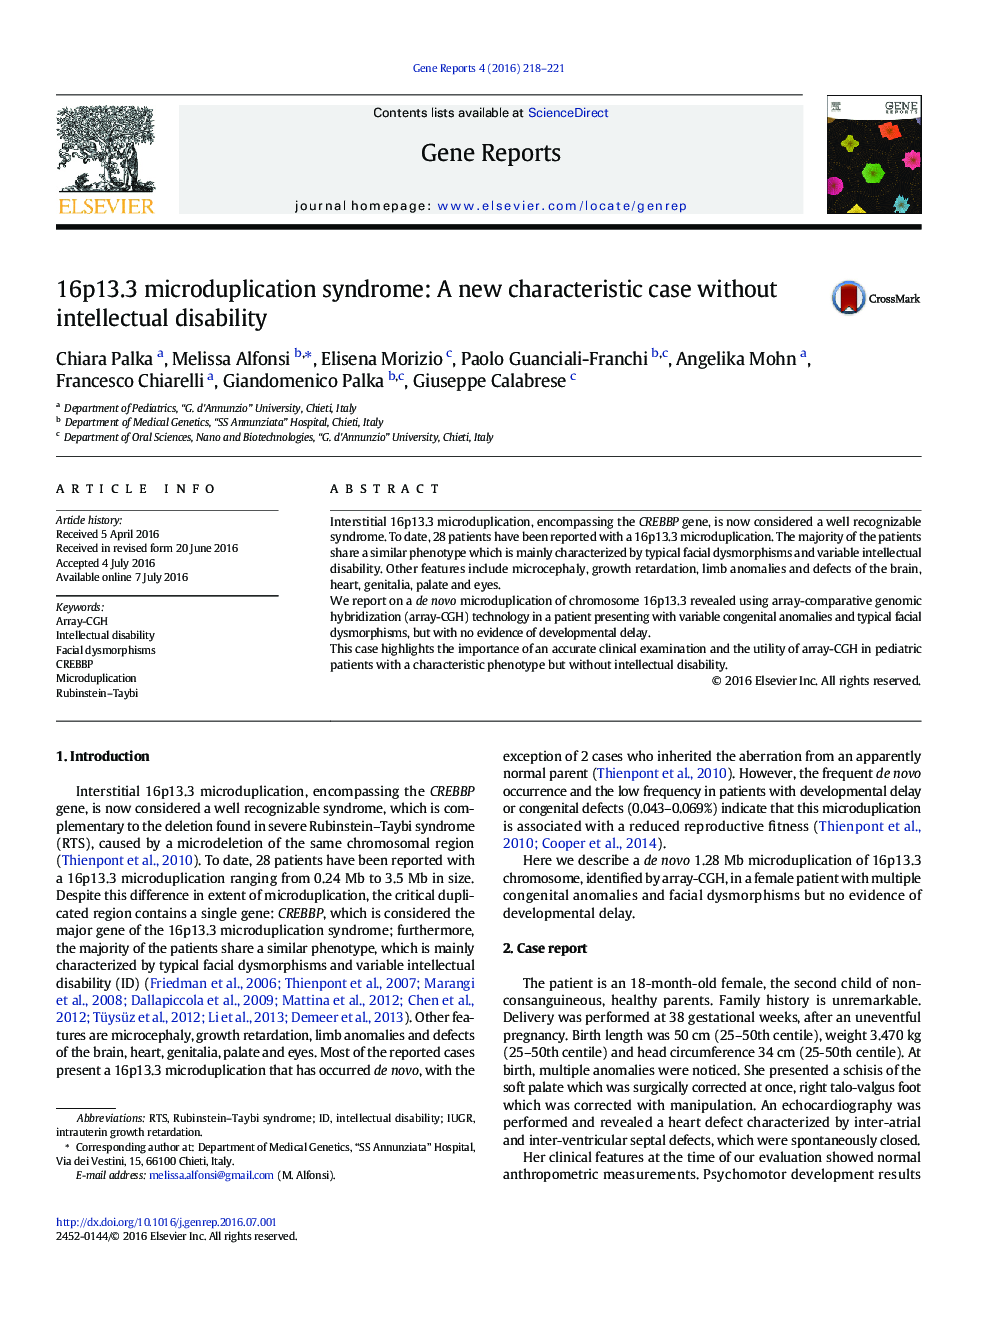 16p13.3 microduplication syndrome: A new characteristic case without intellectual disability